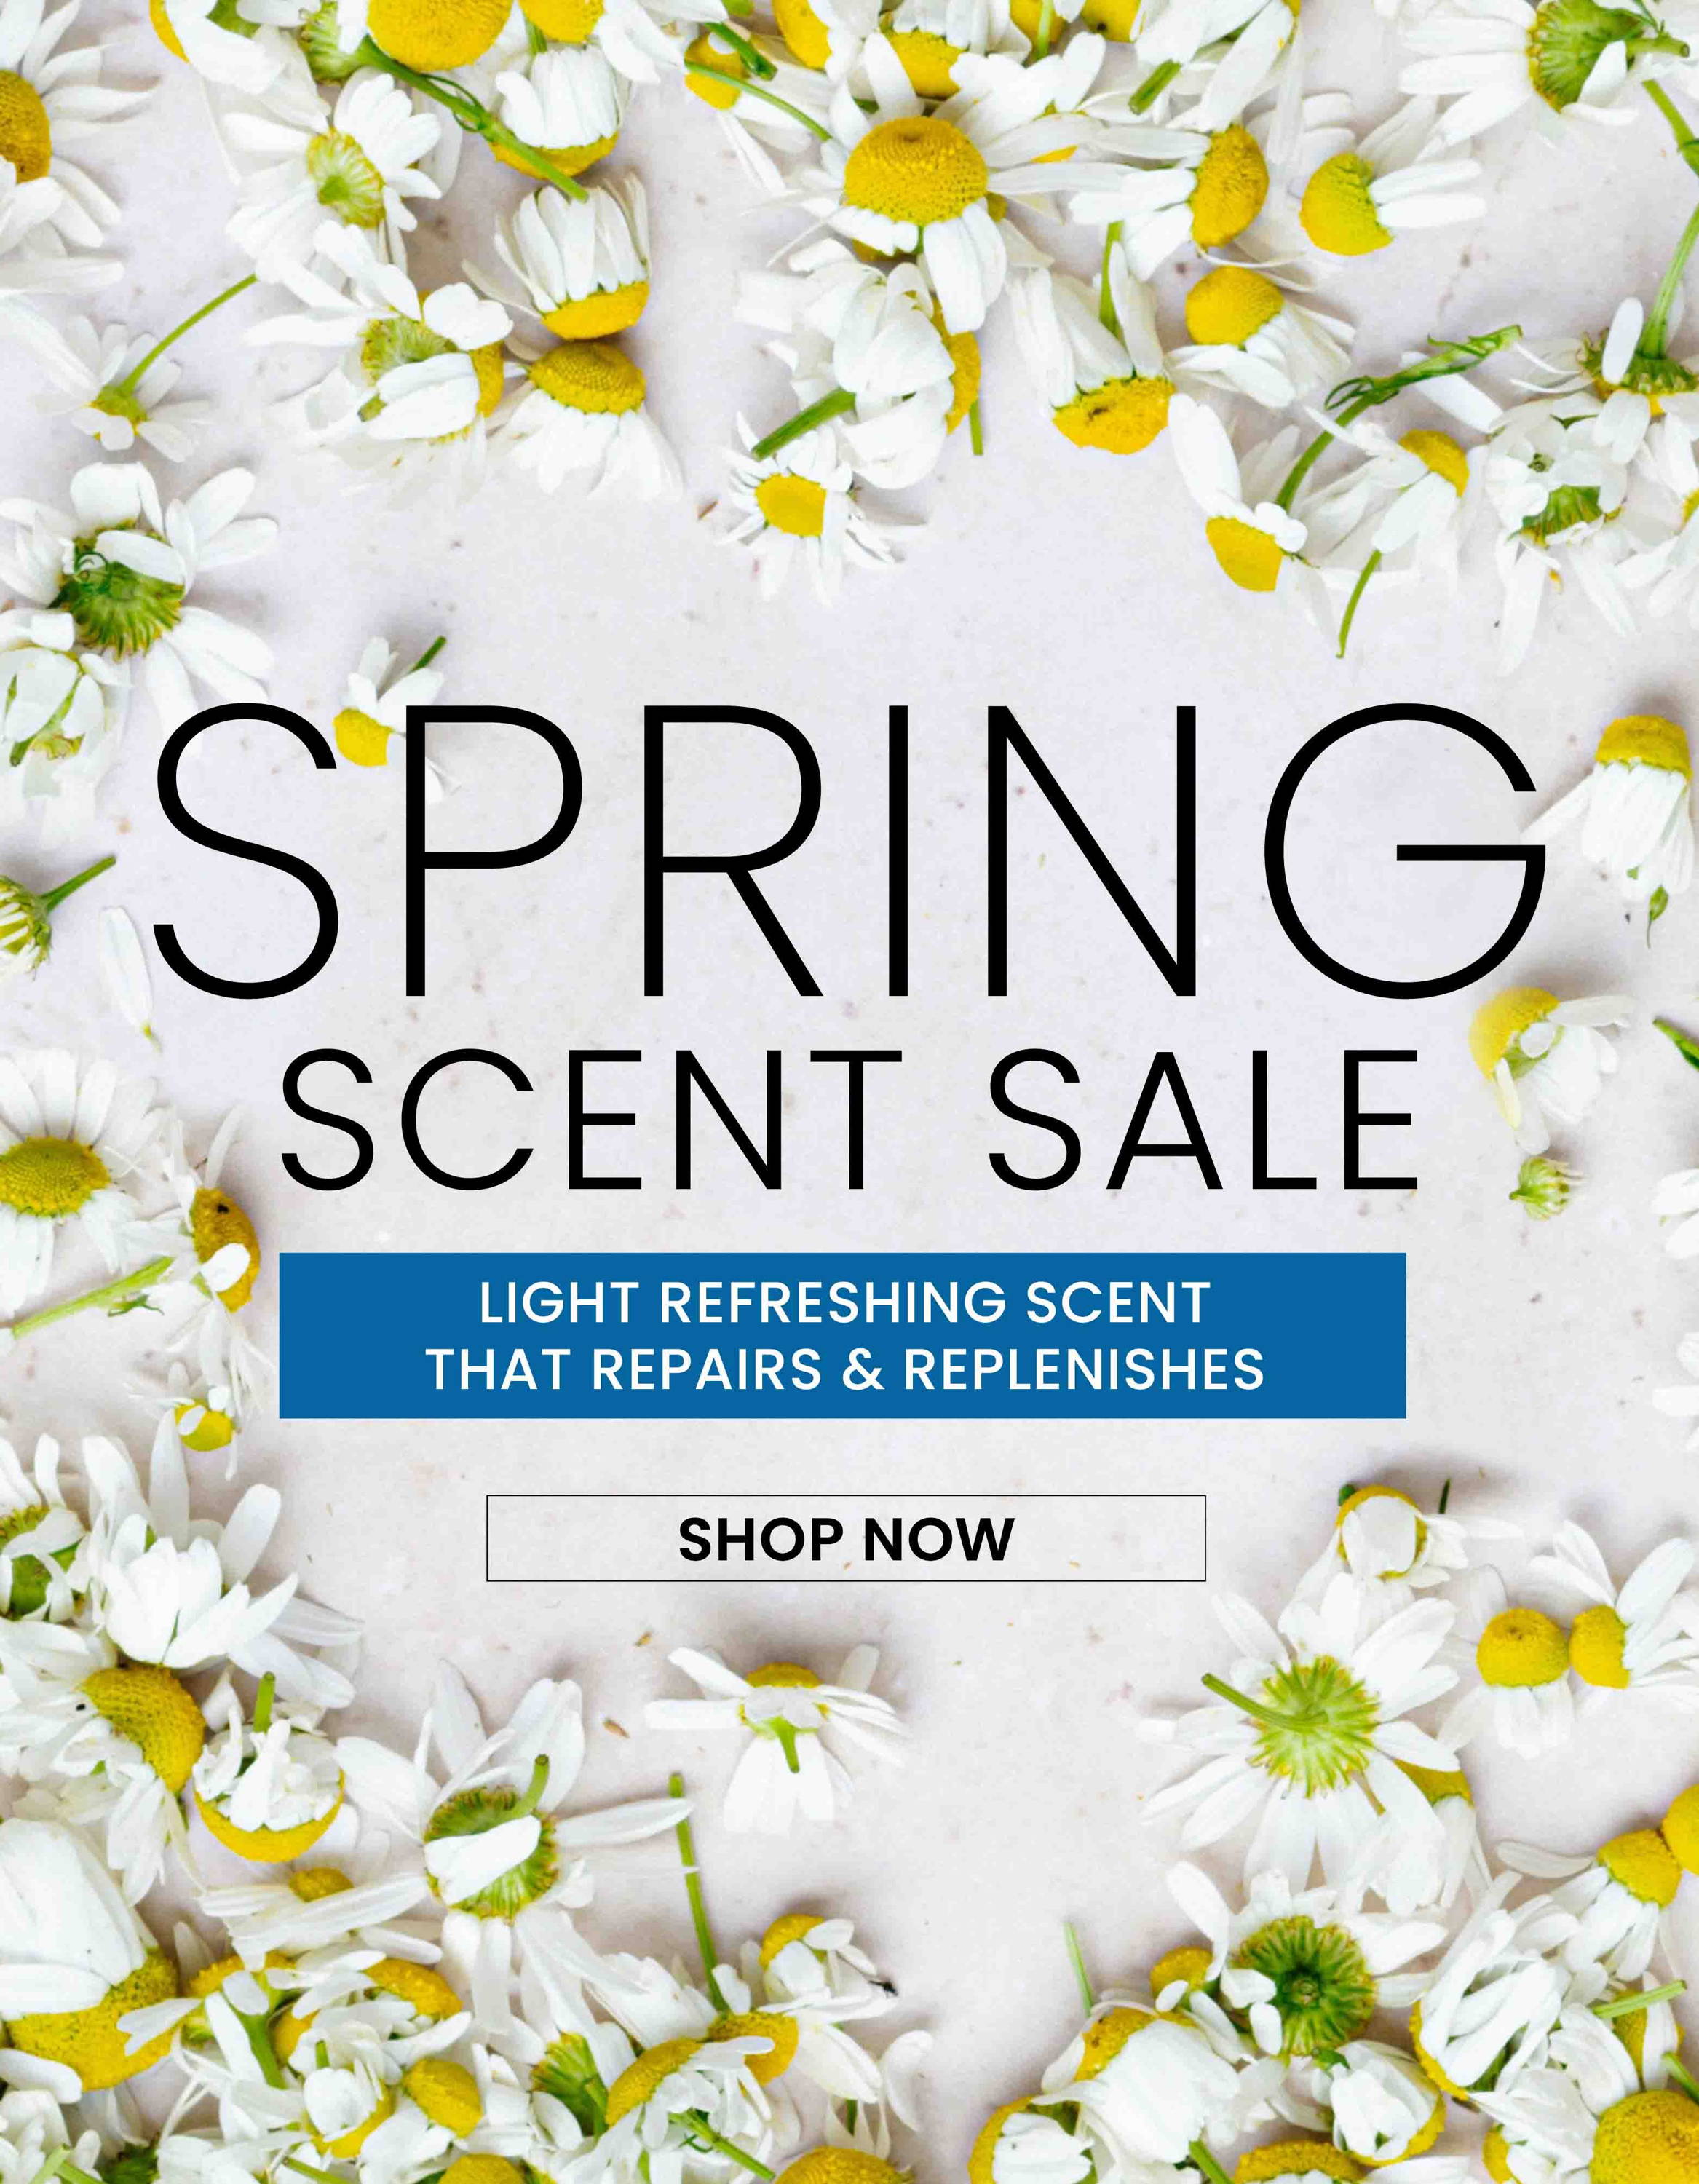 Spring Scent Sale. Save over 30% Off during our Spring Scent Sale. Discounted prices are as marked. Cannot be combined with any other offer. While supplies last.